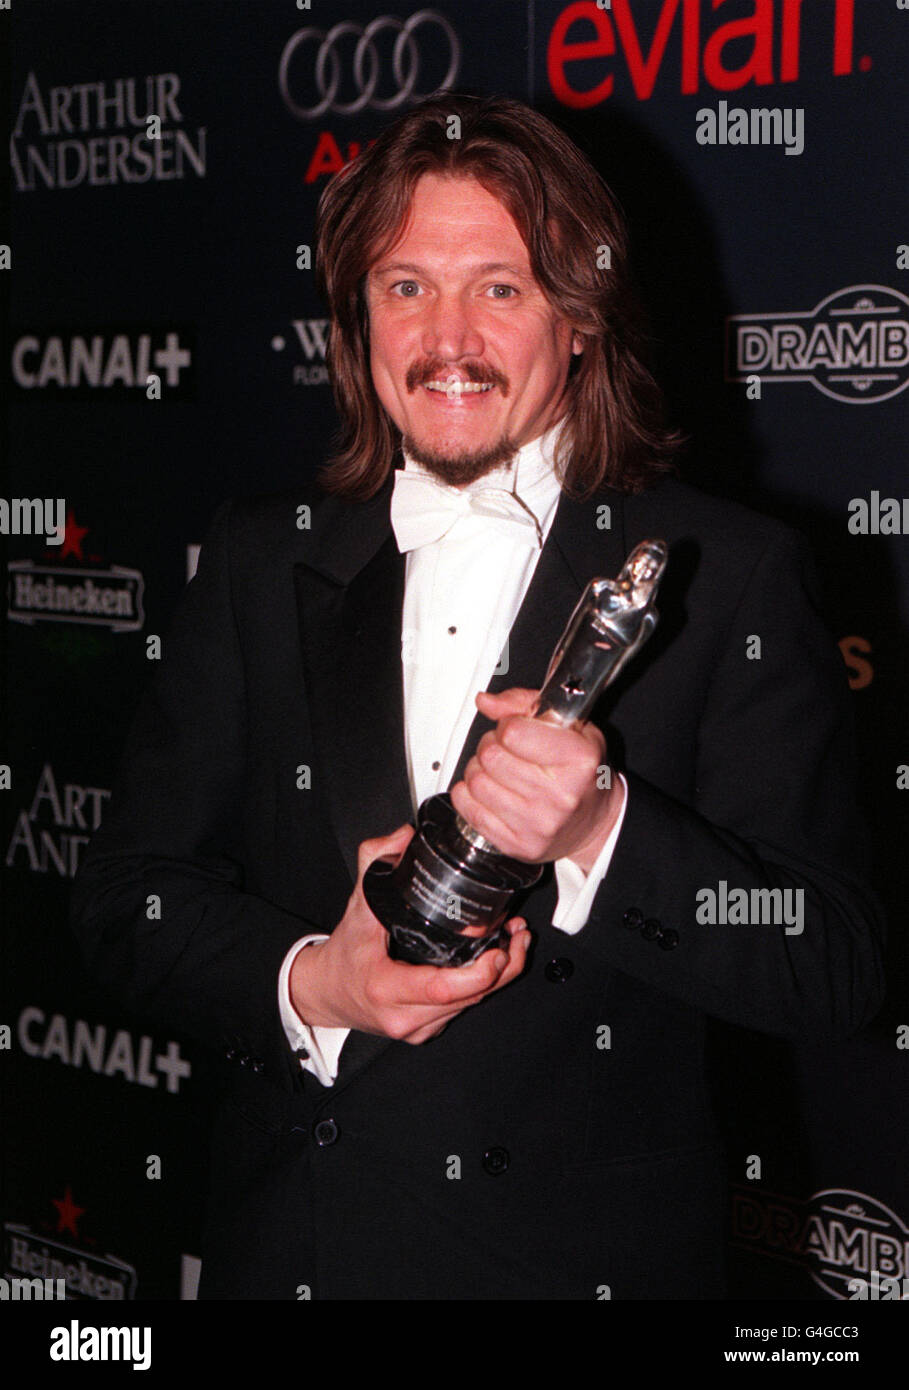 PA NEWS PHOTO 5/12/98 PETER HOWITT WINS THE AWARD FOR BEST EUROPEAN SCREENWRITER FOR HIS FILM 'SLIDING DOORS' AT THE EUROPEAN FILM AWARDS, HELD AT LONDON'S OLD VIC THEATRE. Stock Photo